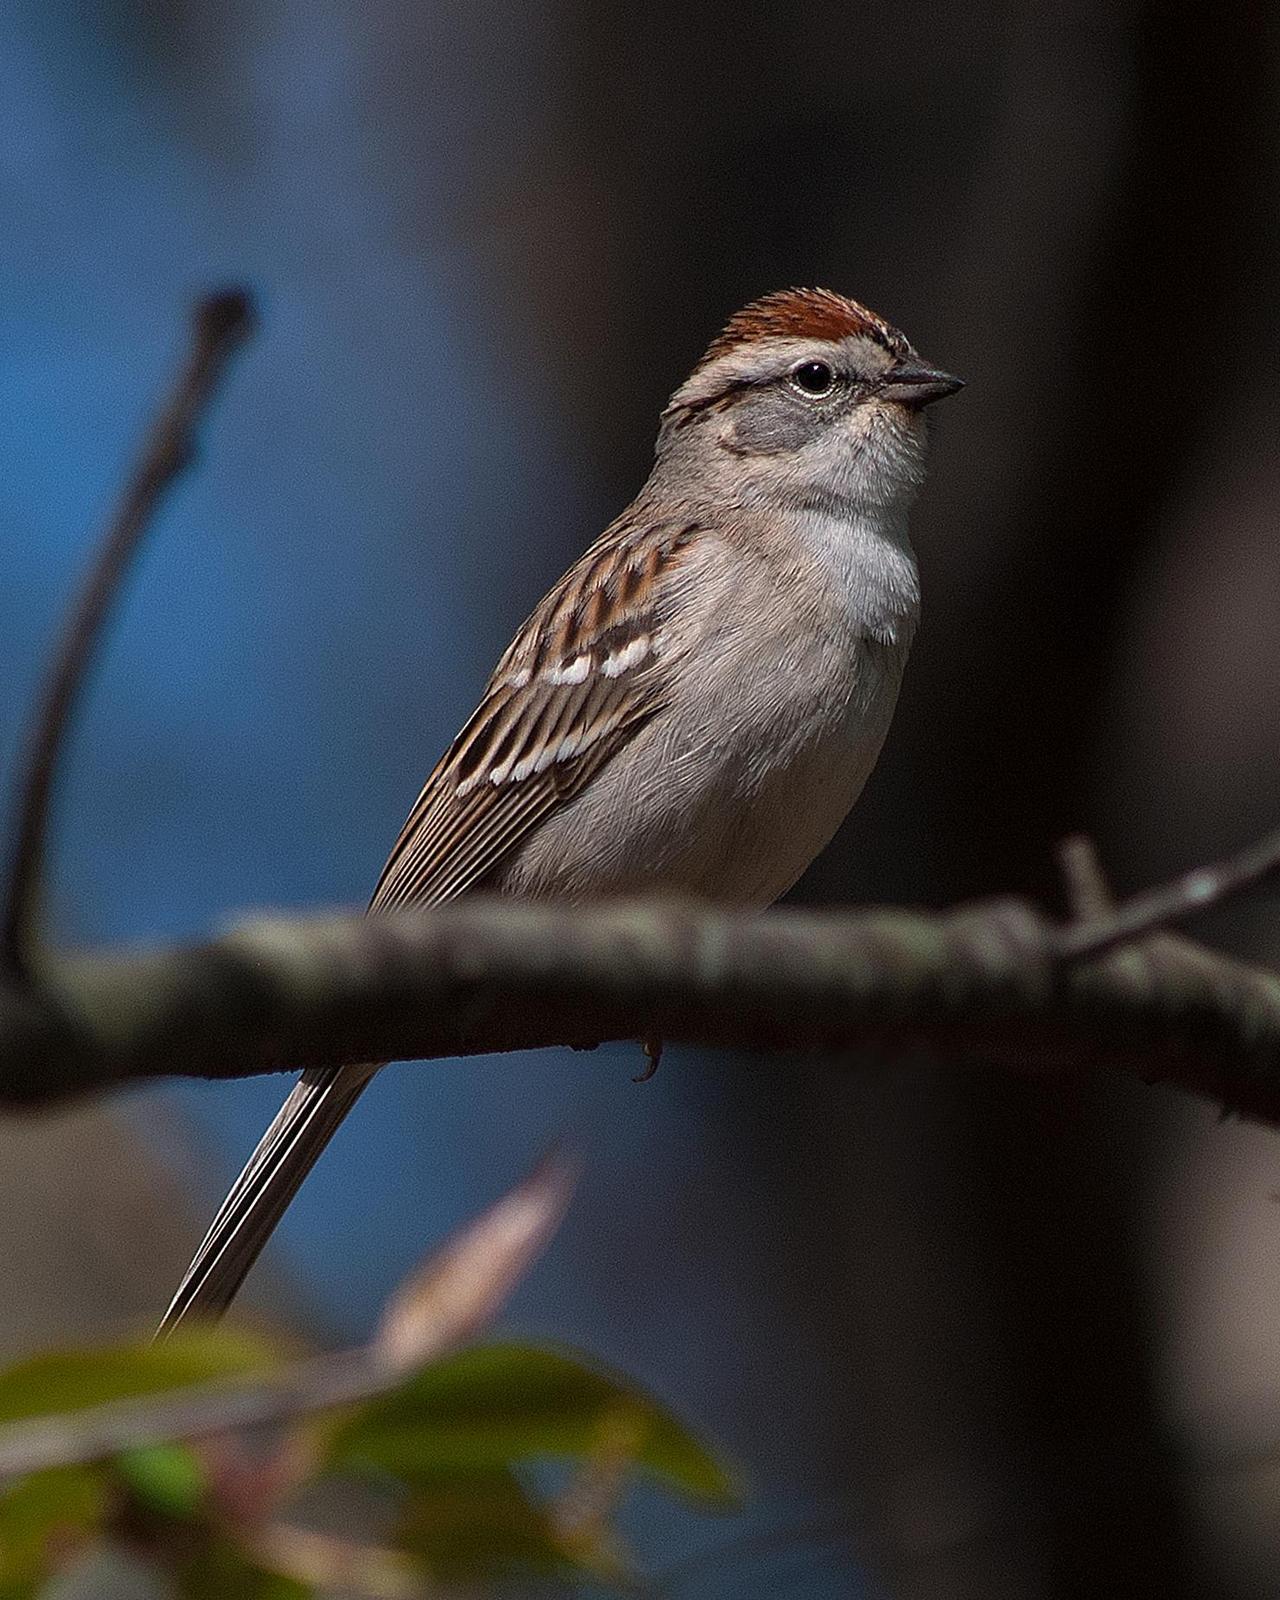 Chipping Sparrow Photo by Mark Blassage